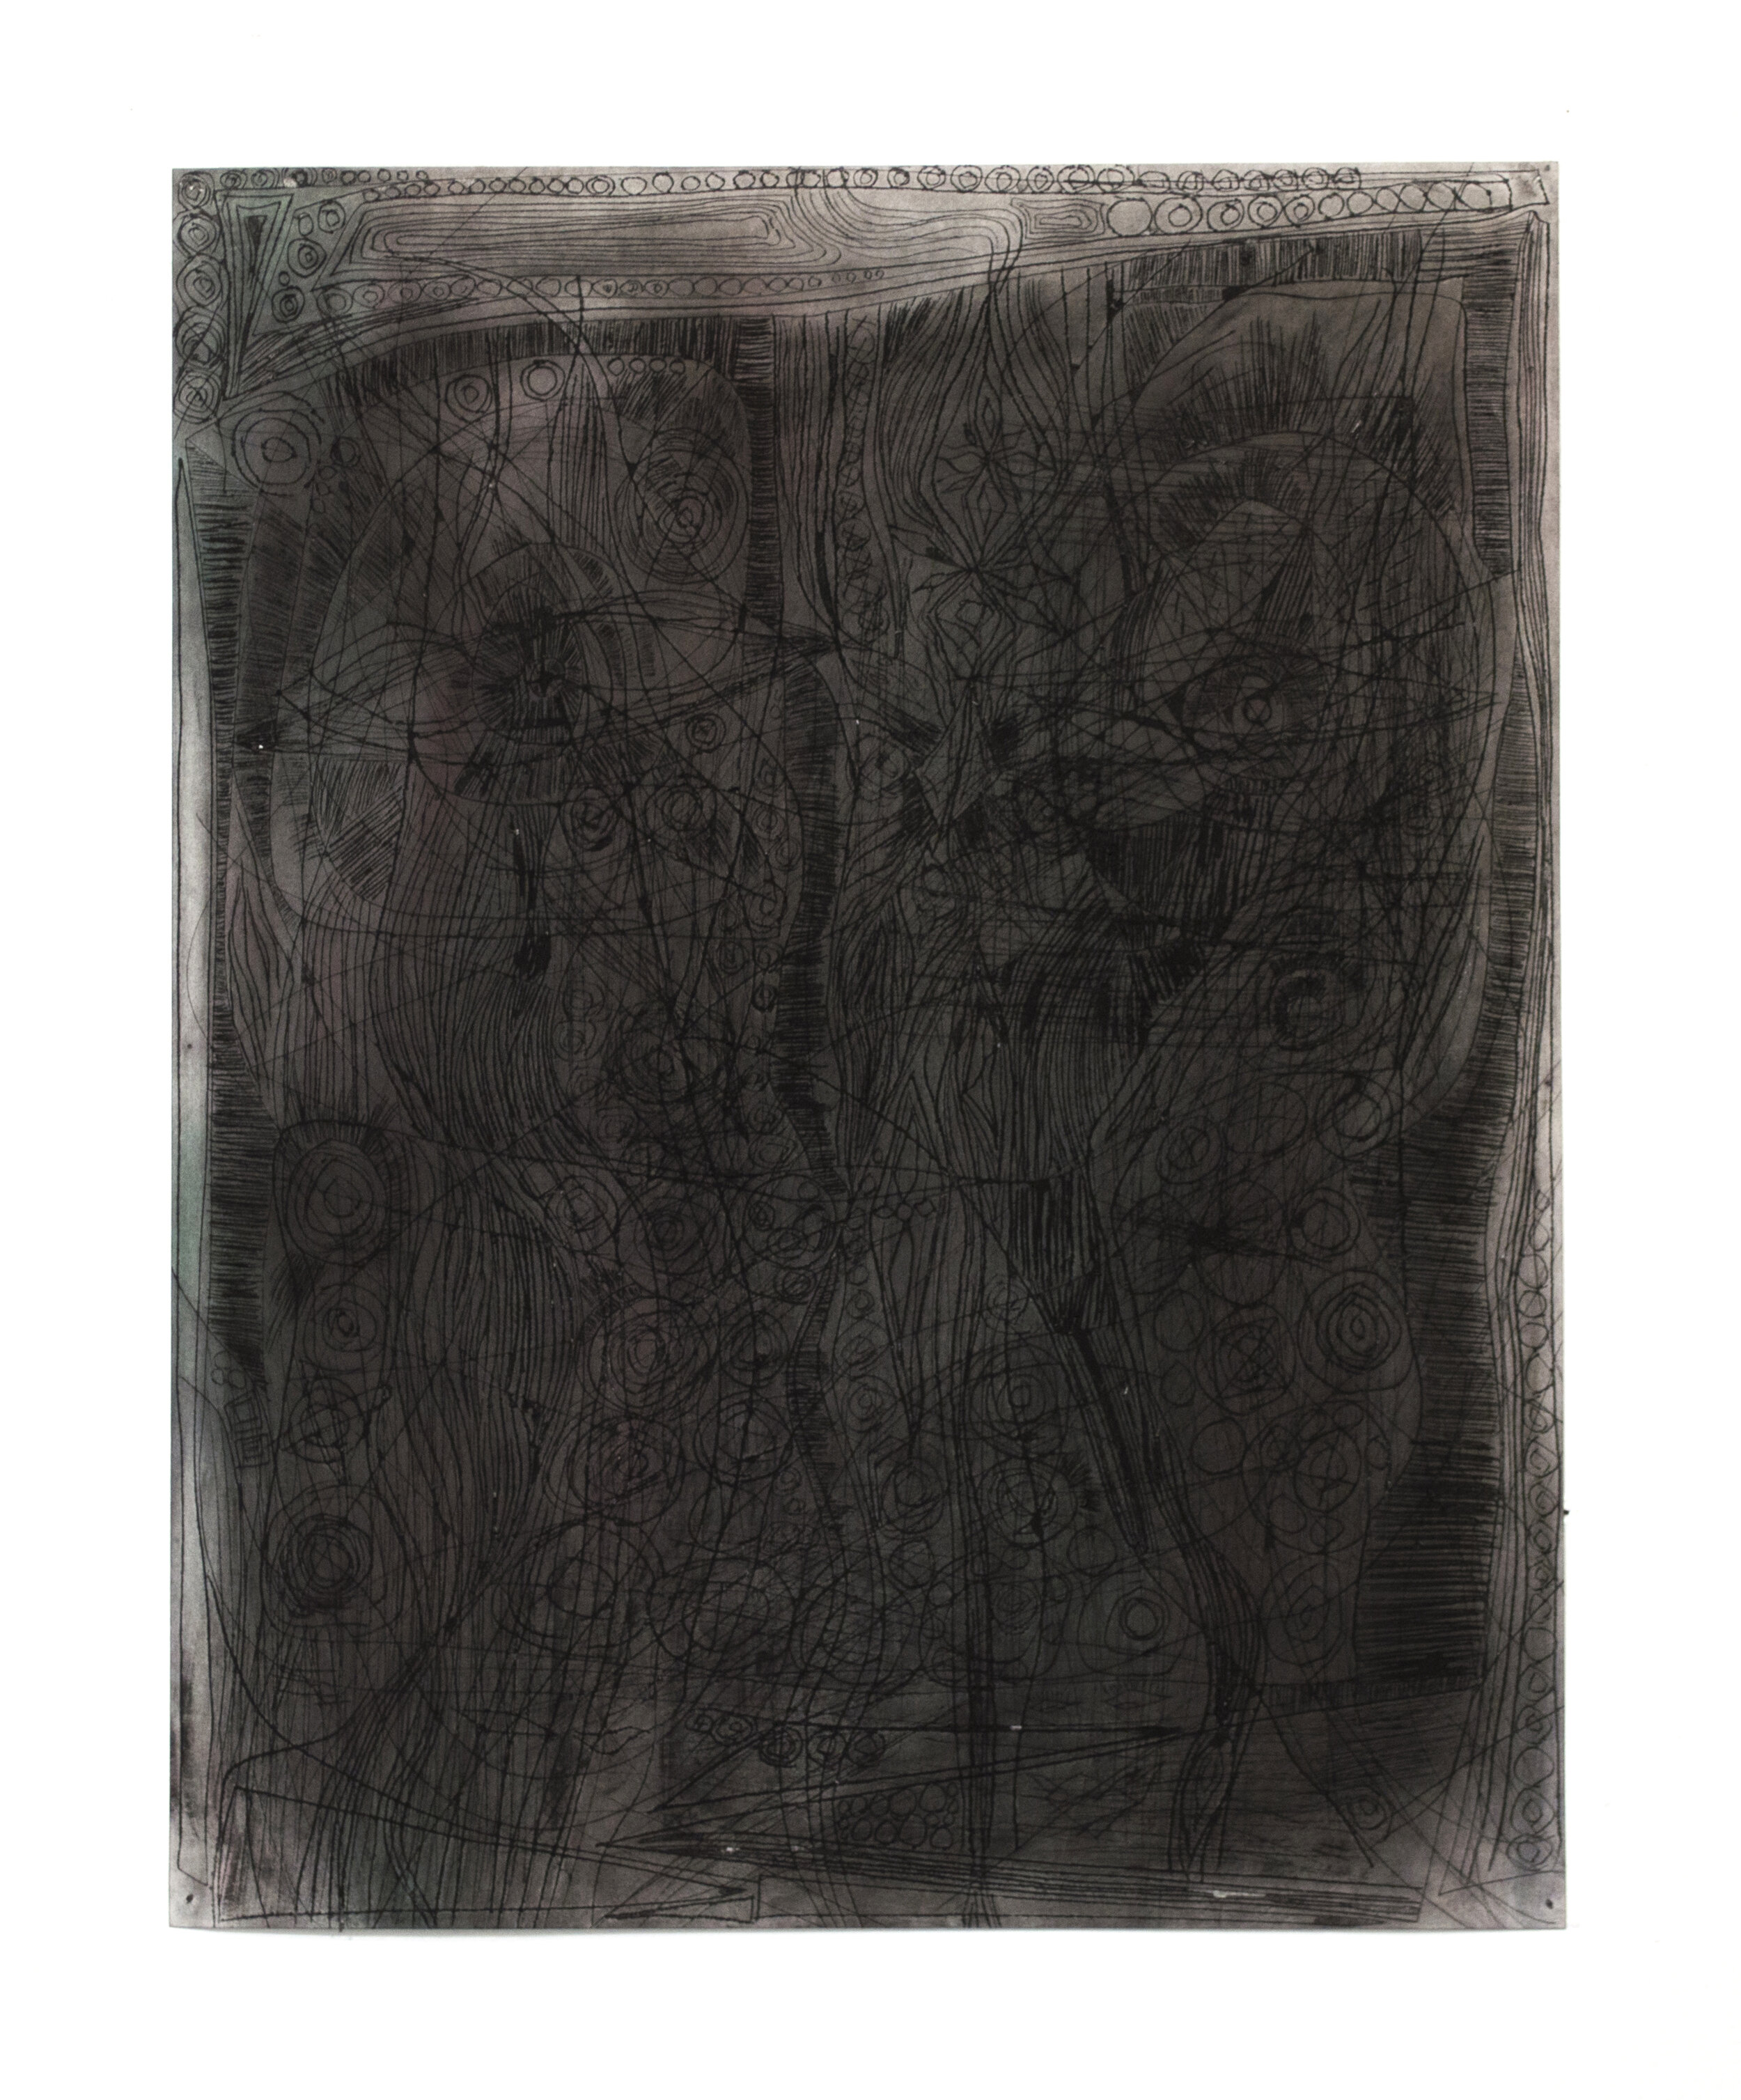 Untitled, 2018 - Charcoal, dust, pigment on etched paper - 30 x 20 inches